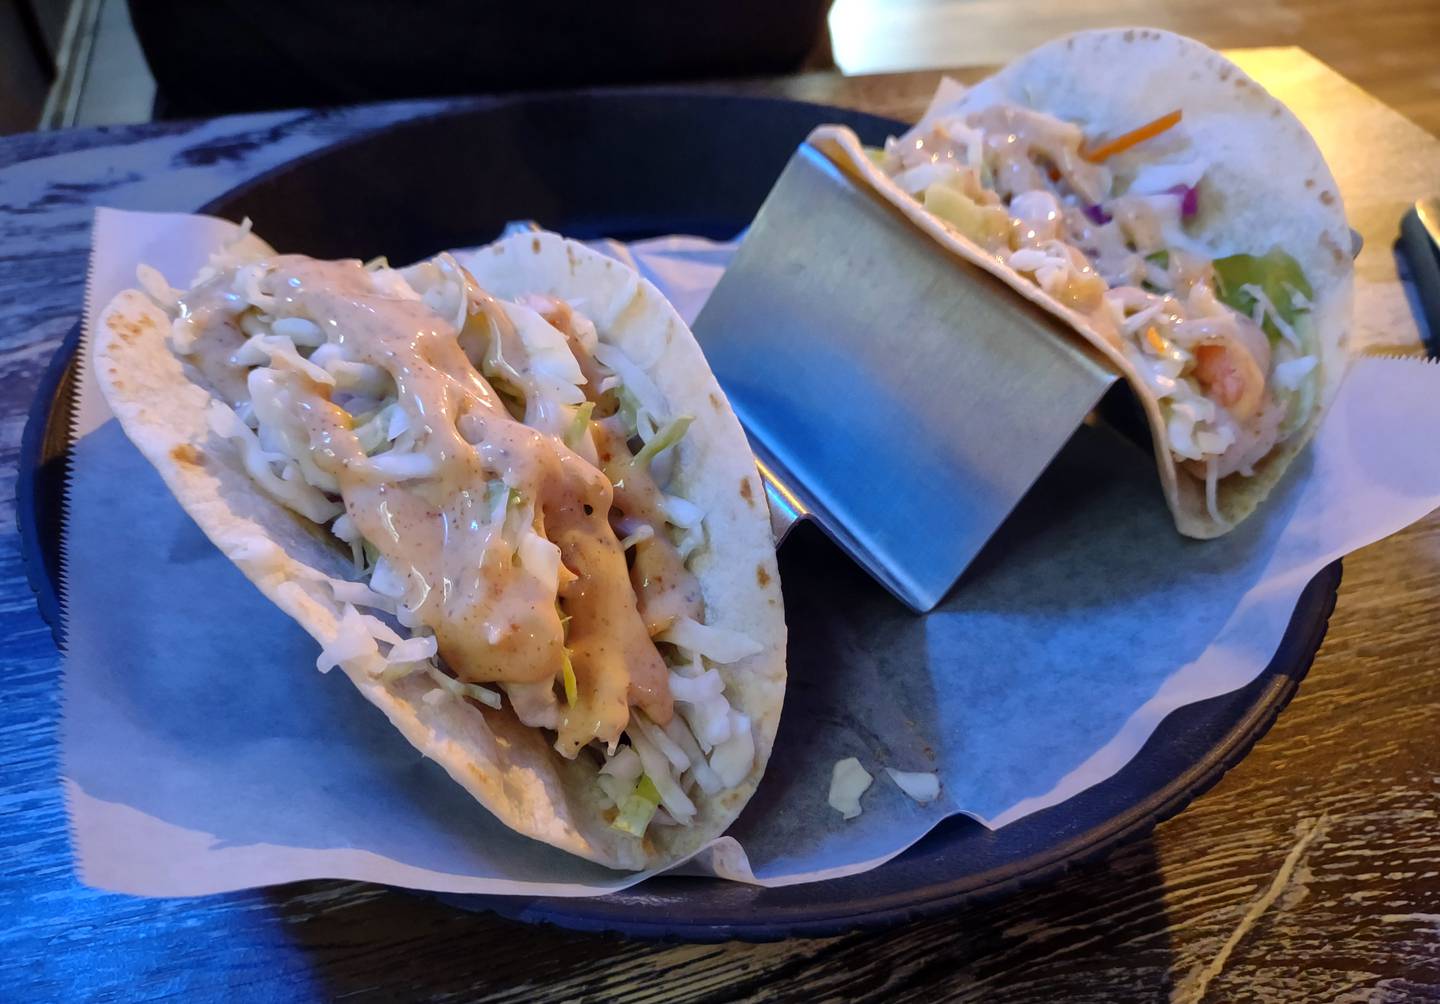 Two tacos are sold a la carte on the menu at Ziggy's Bar & Grill in downtown Marseilles. The fish taco has breaded alaskan pollock and a choice of ranch or Ziggy slaw. The shrimp taco features shrimp and Ziggy slaw.